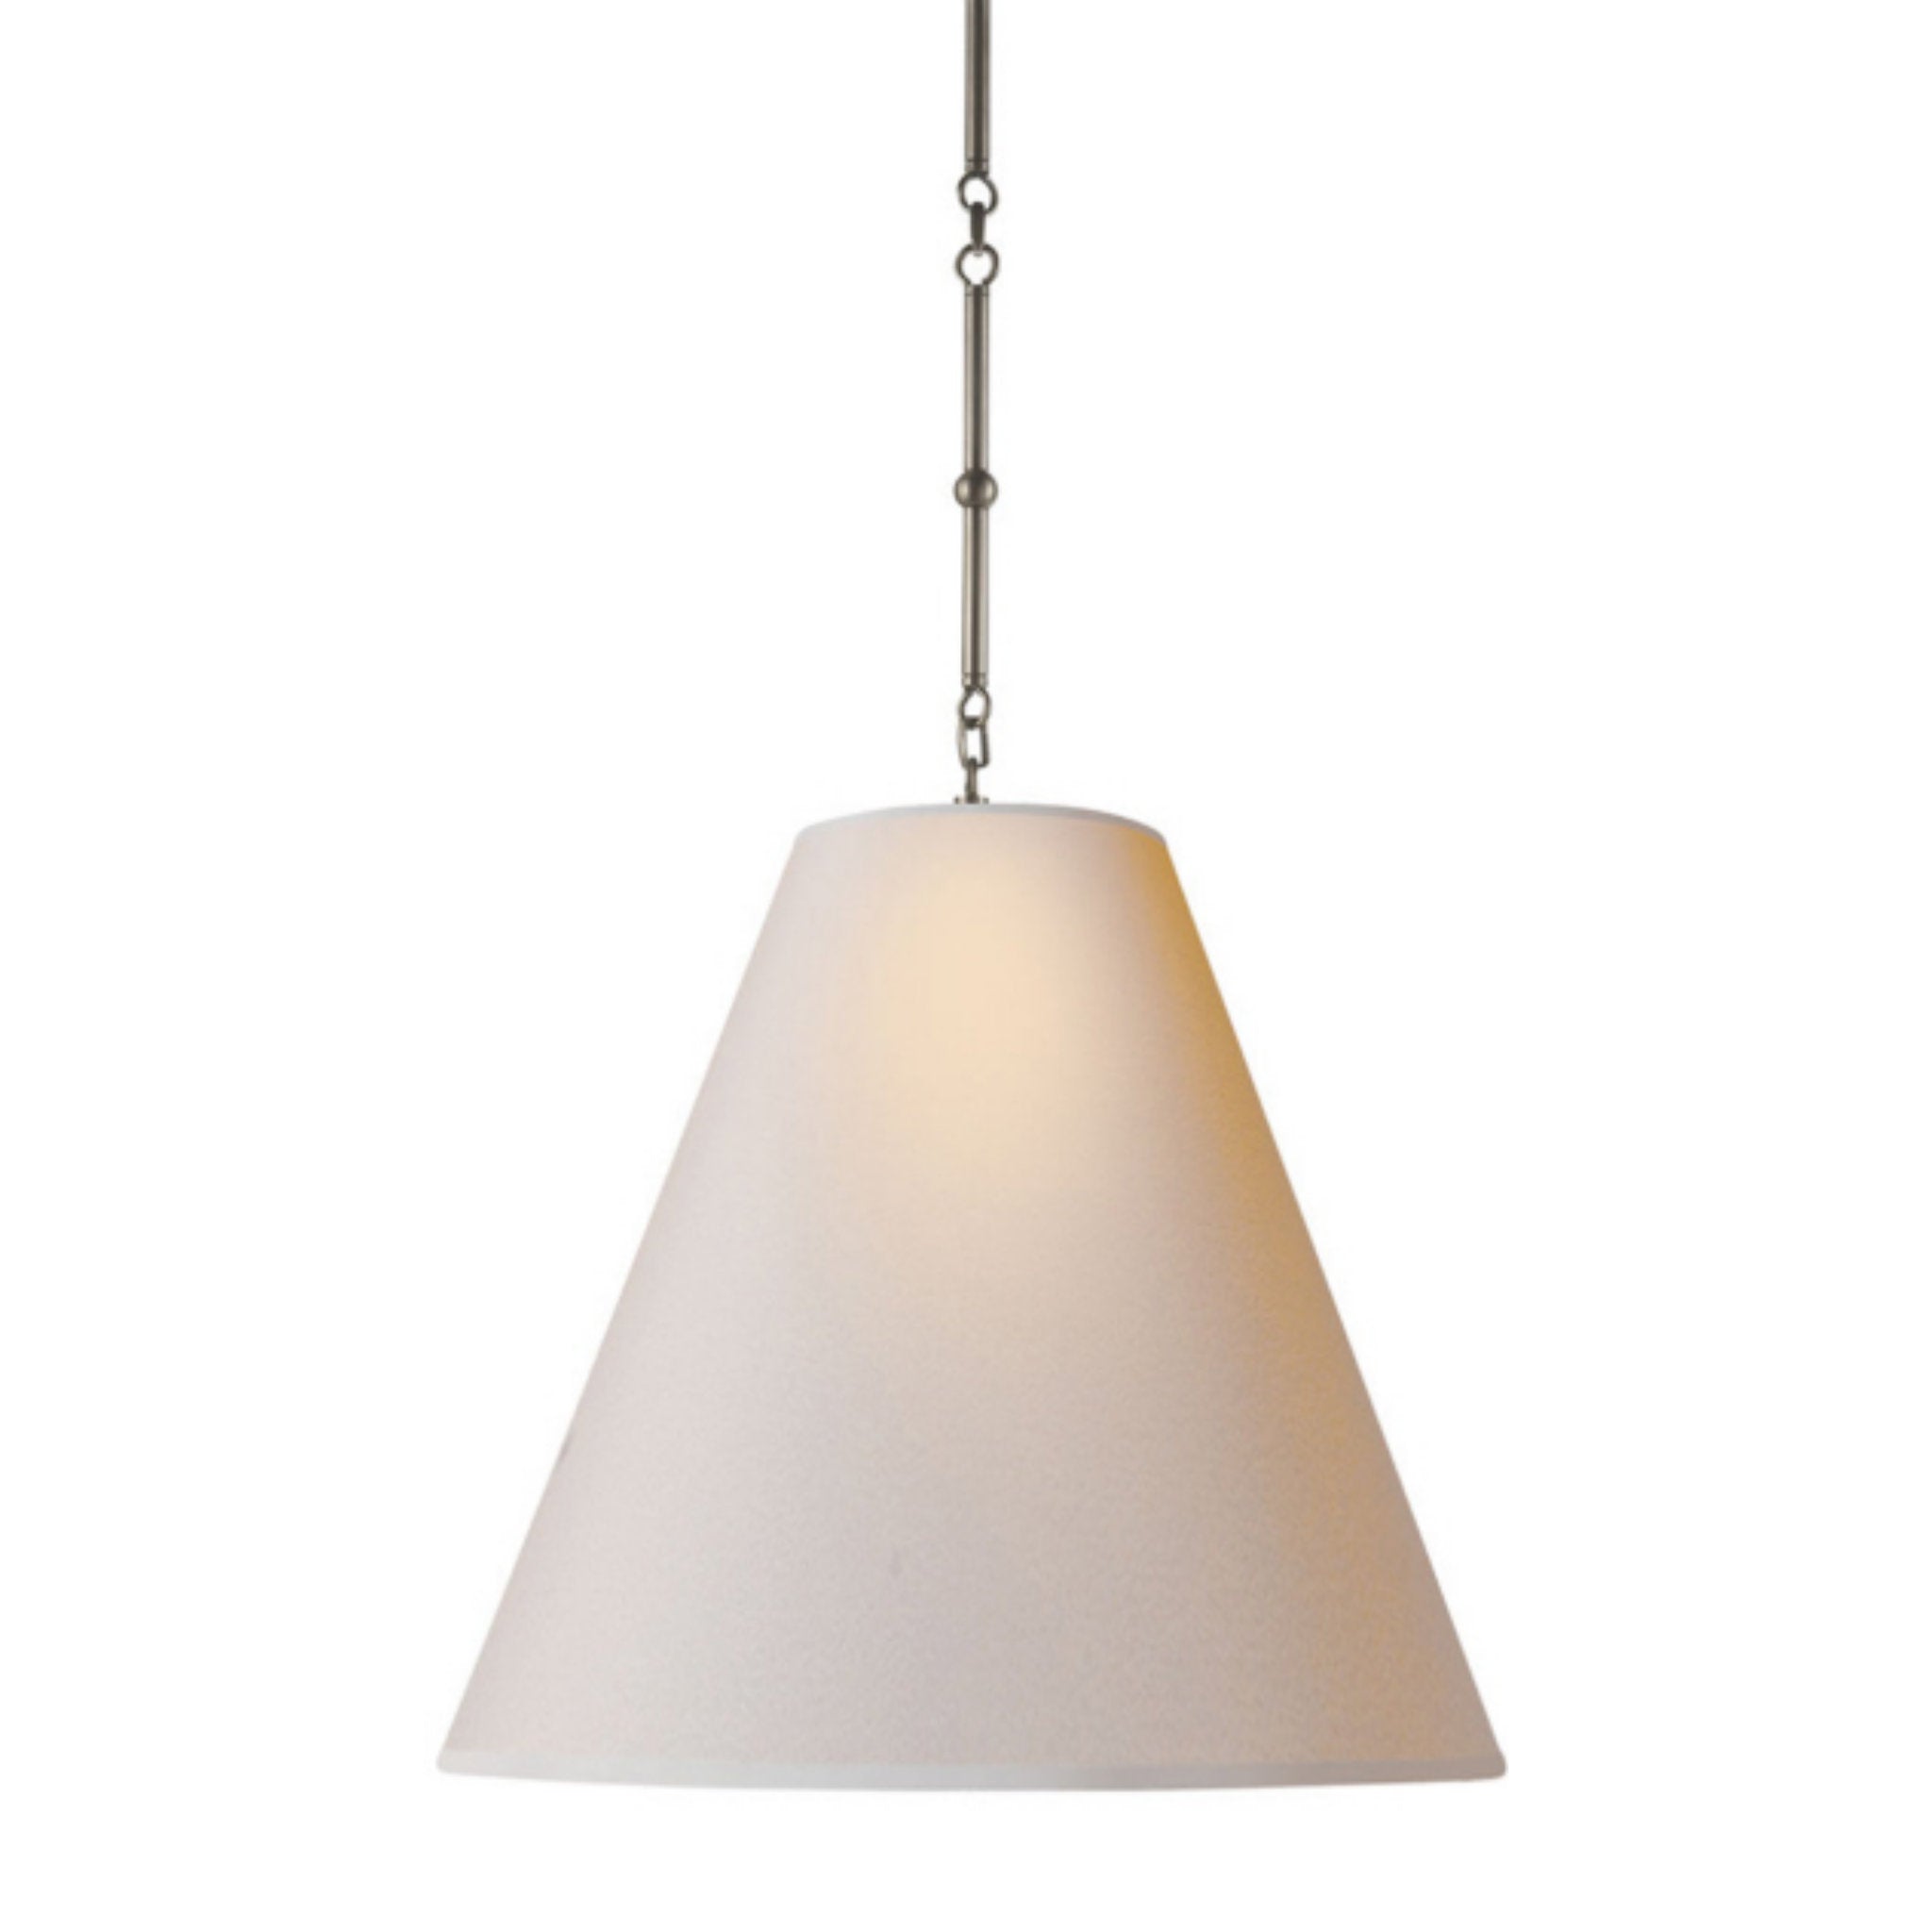 Thomas O'Brien Goodman Large Hanging Lamp in Antique Nickel with Natural Paper Shade